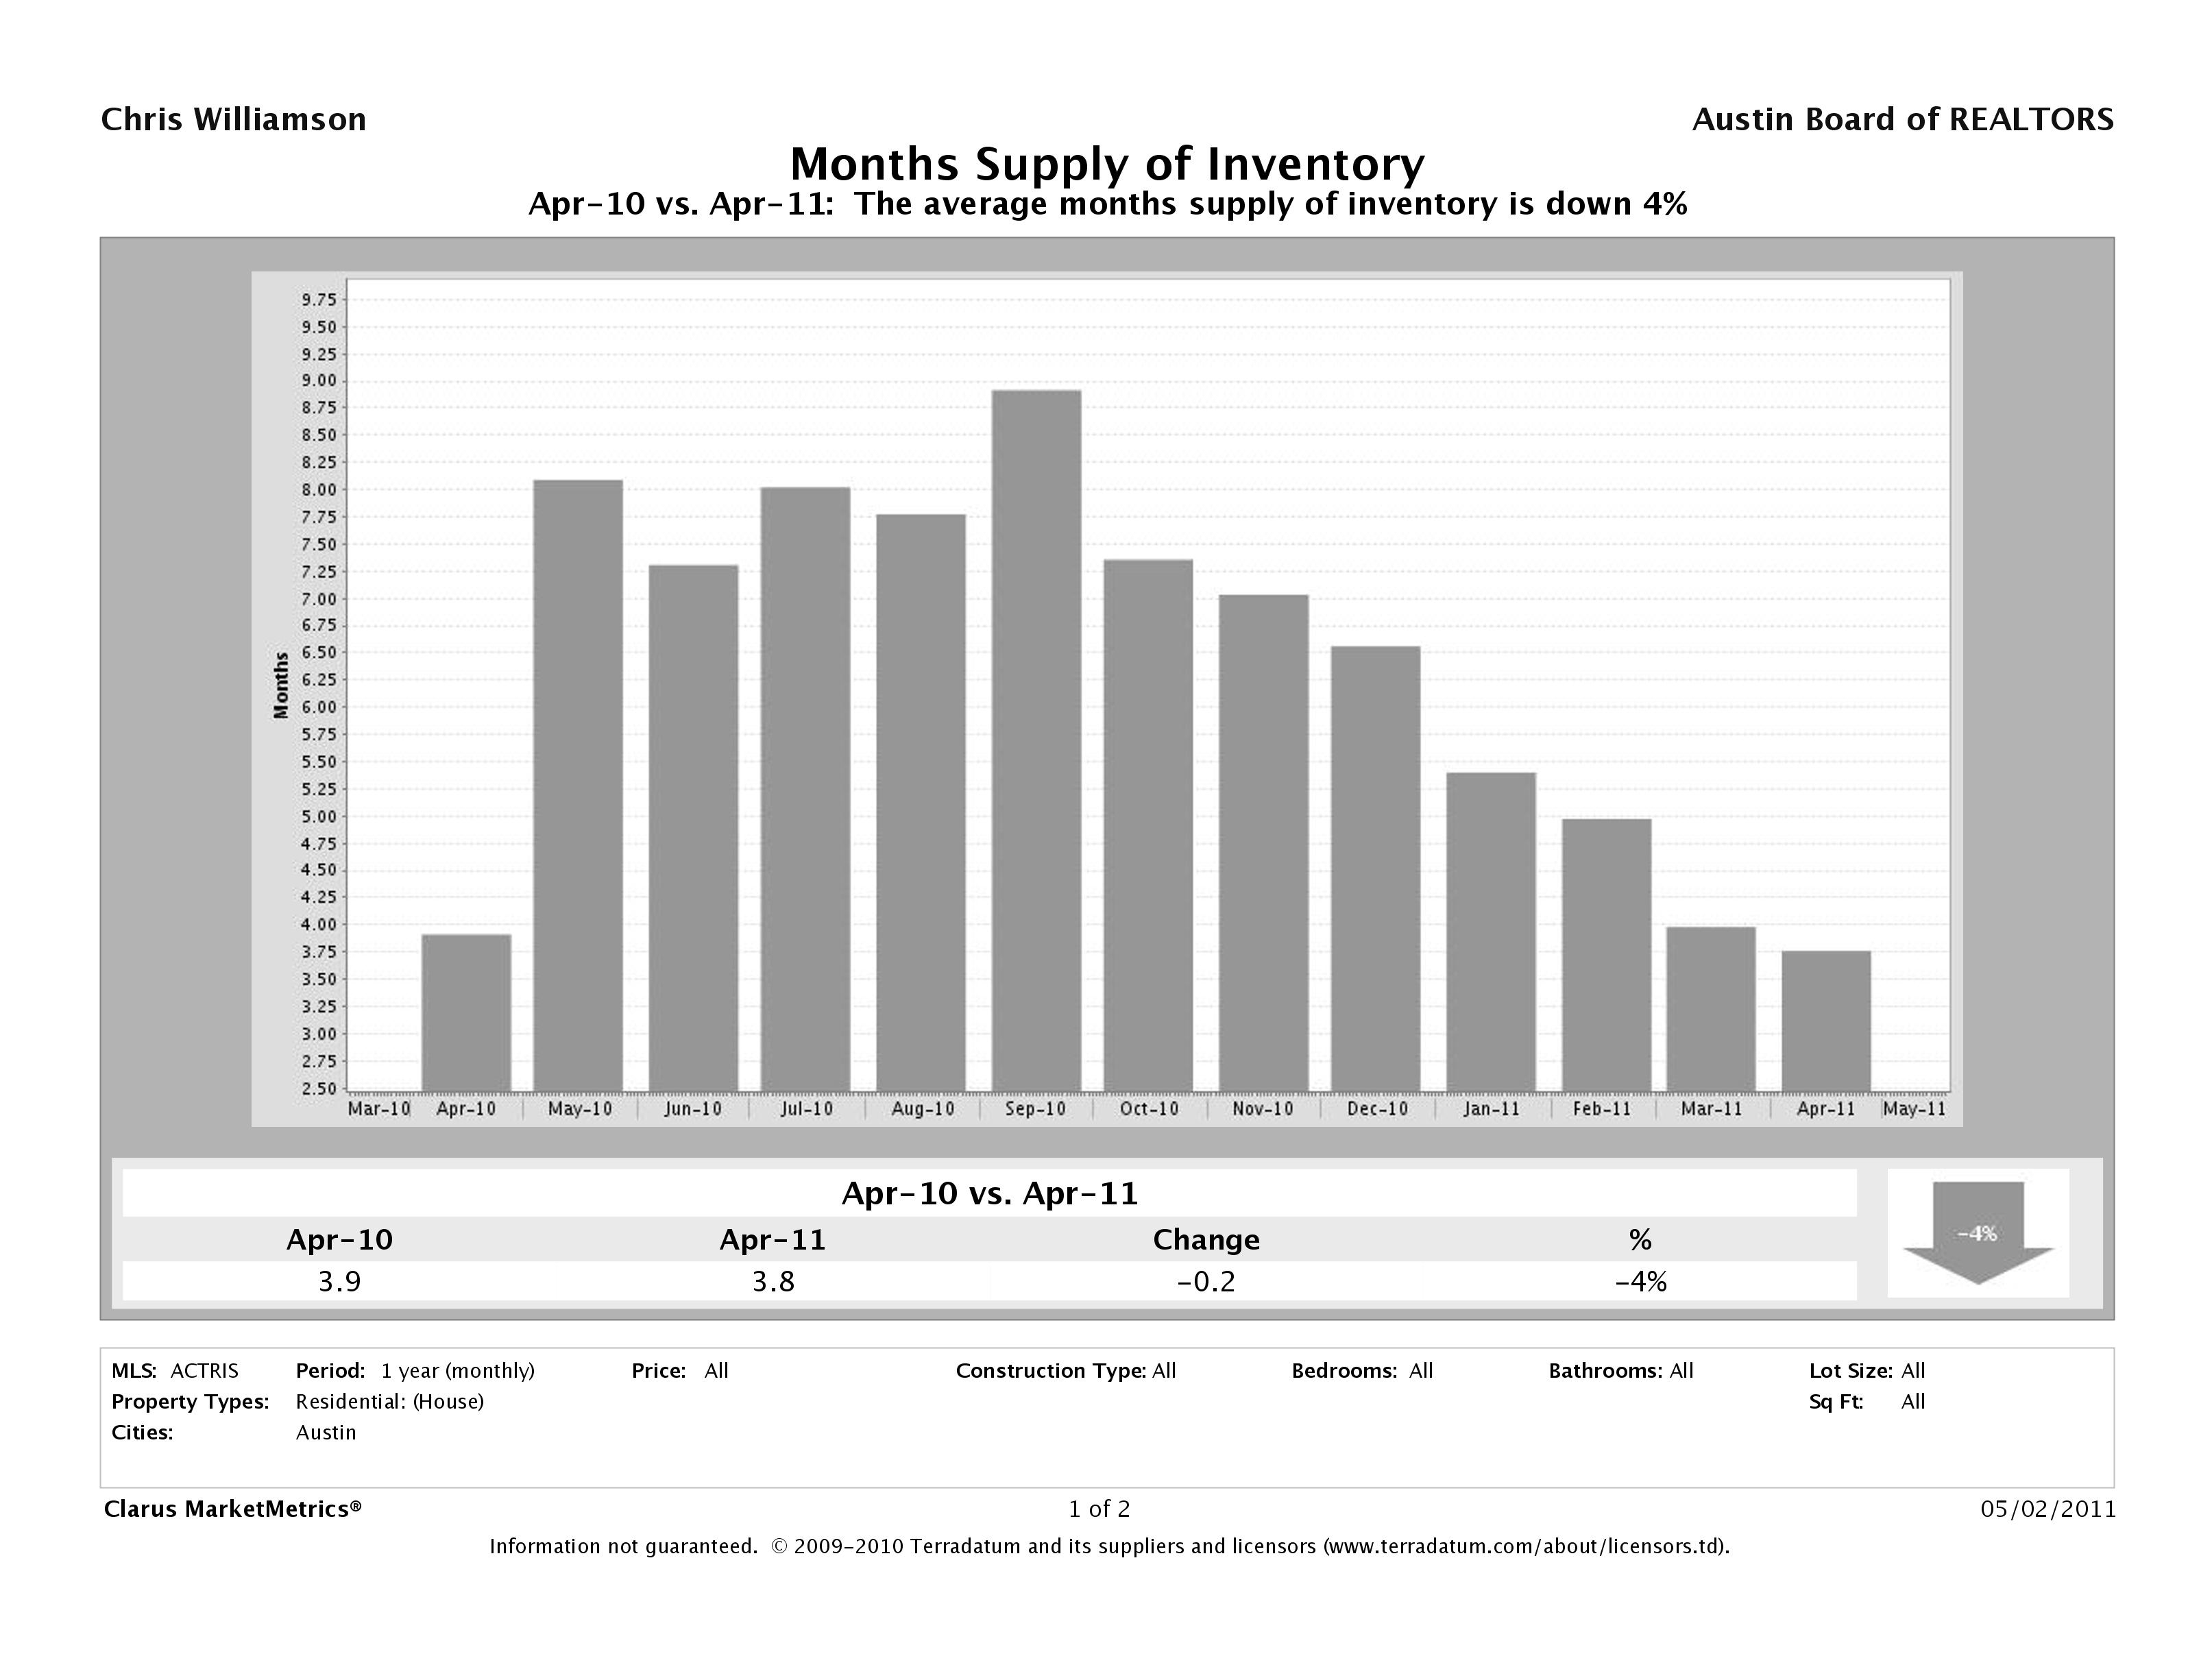 Austin single family home months inventory april 2011